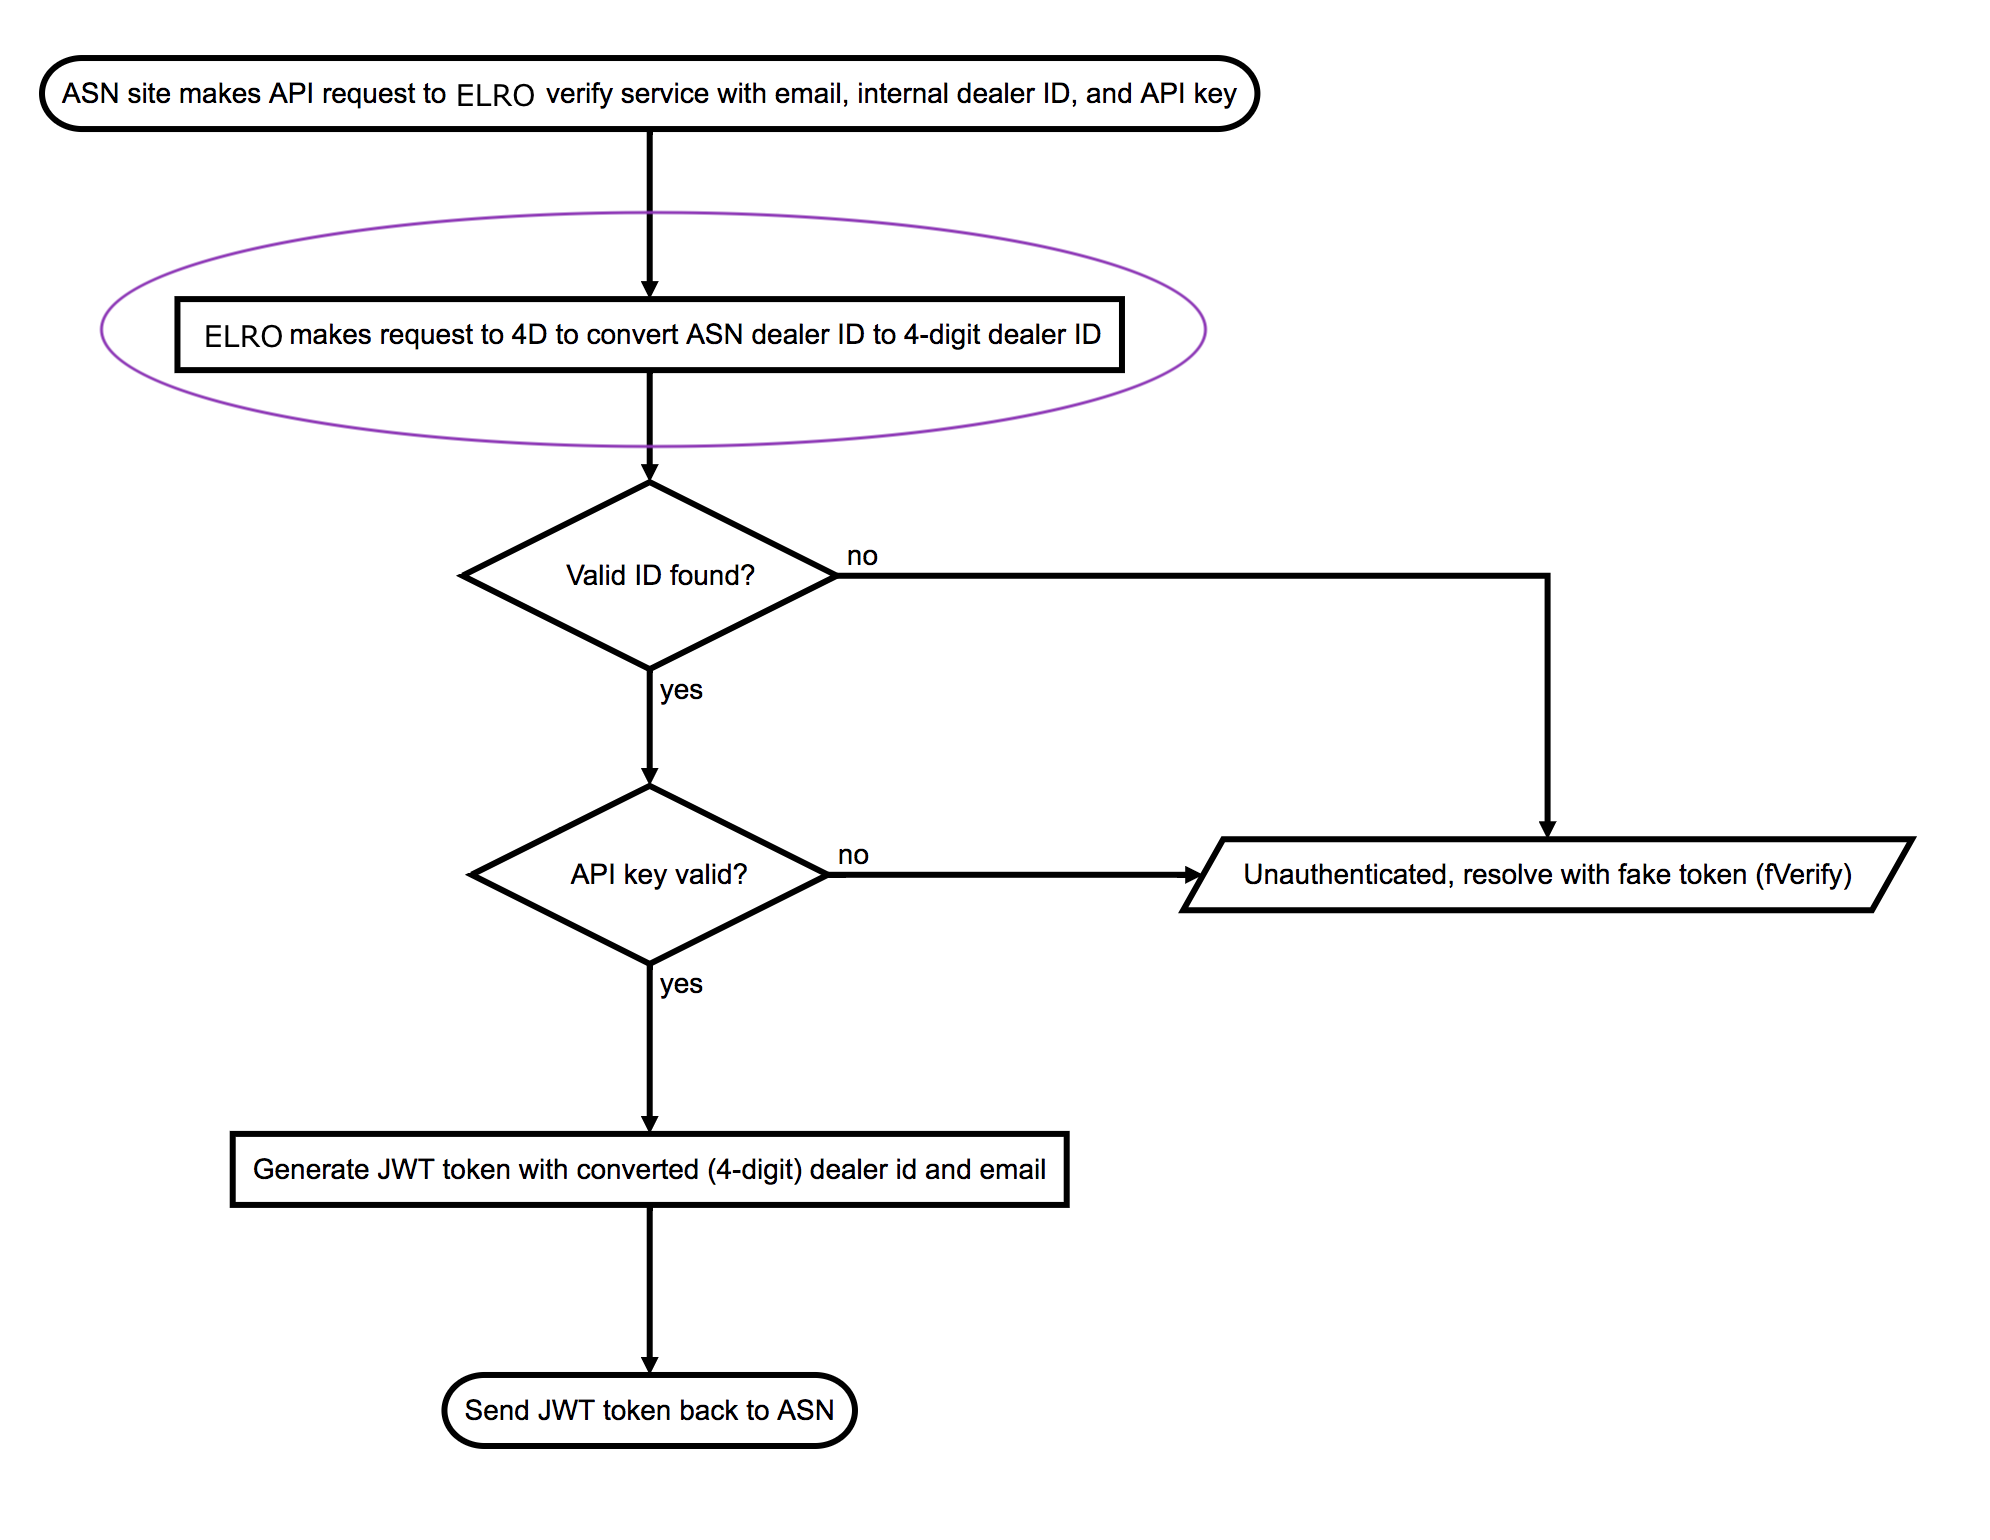 Complex flow chart with annotations